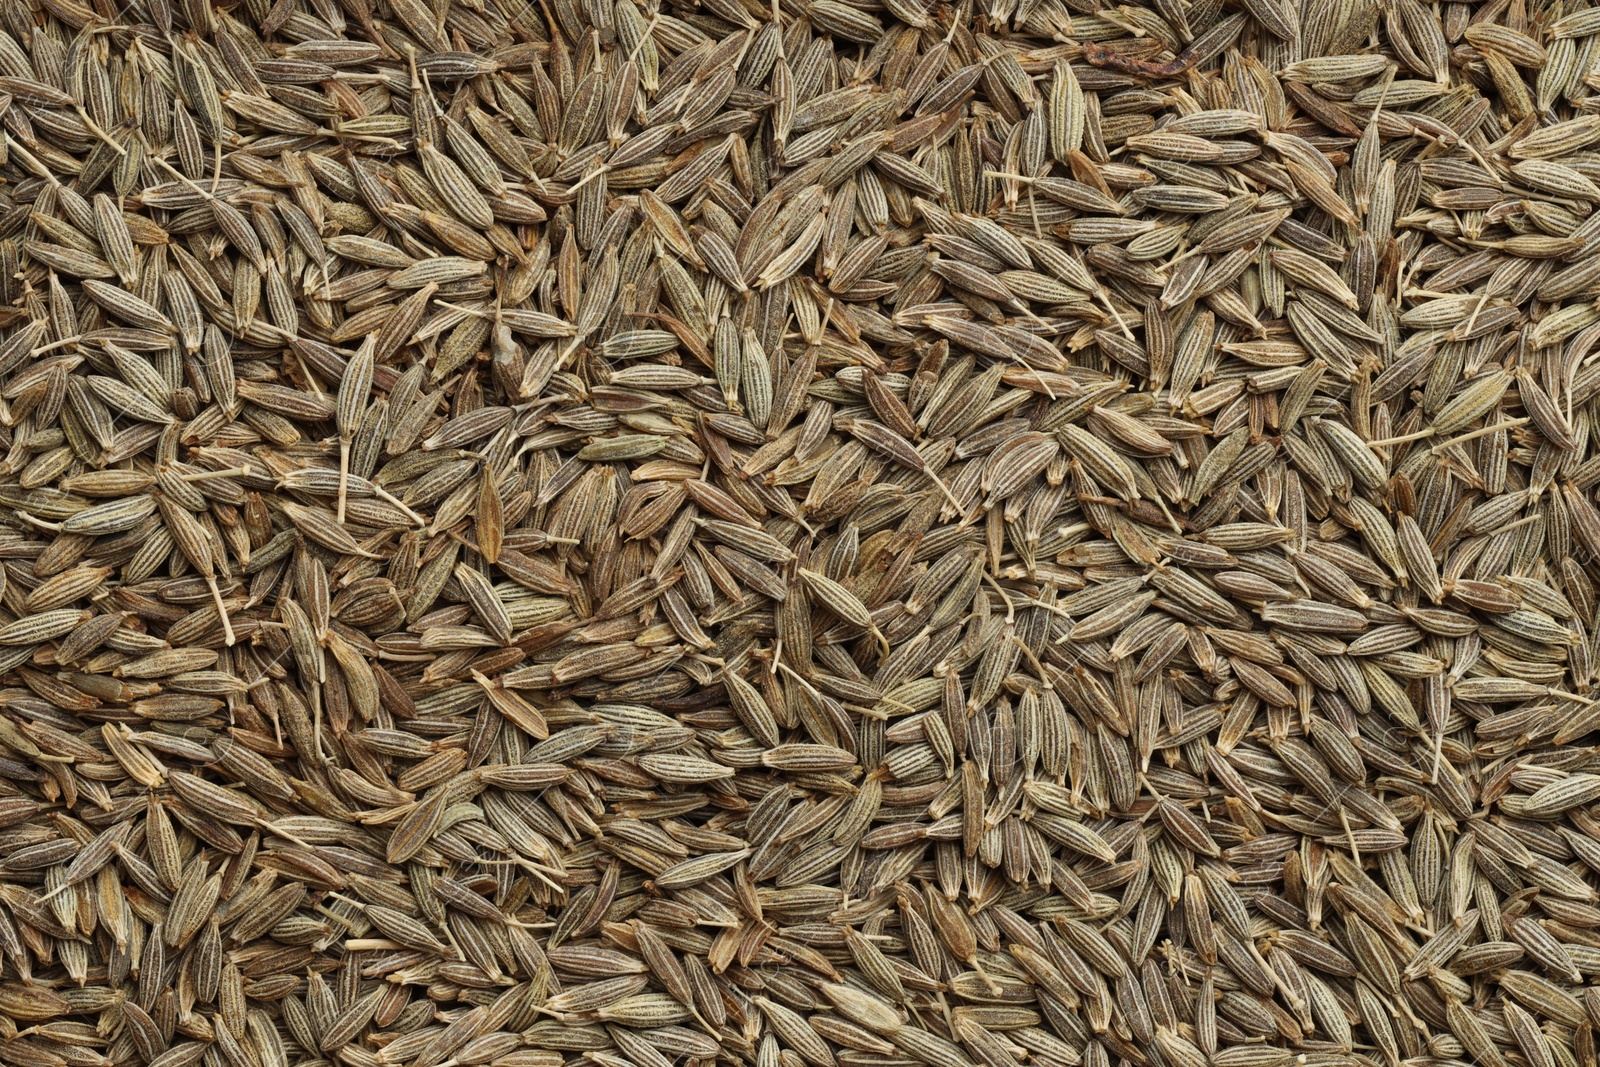 Photo of Aromatic caraway seeds as background, top view